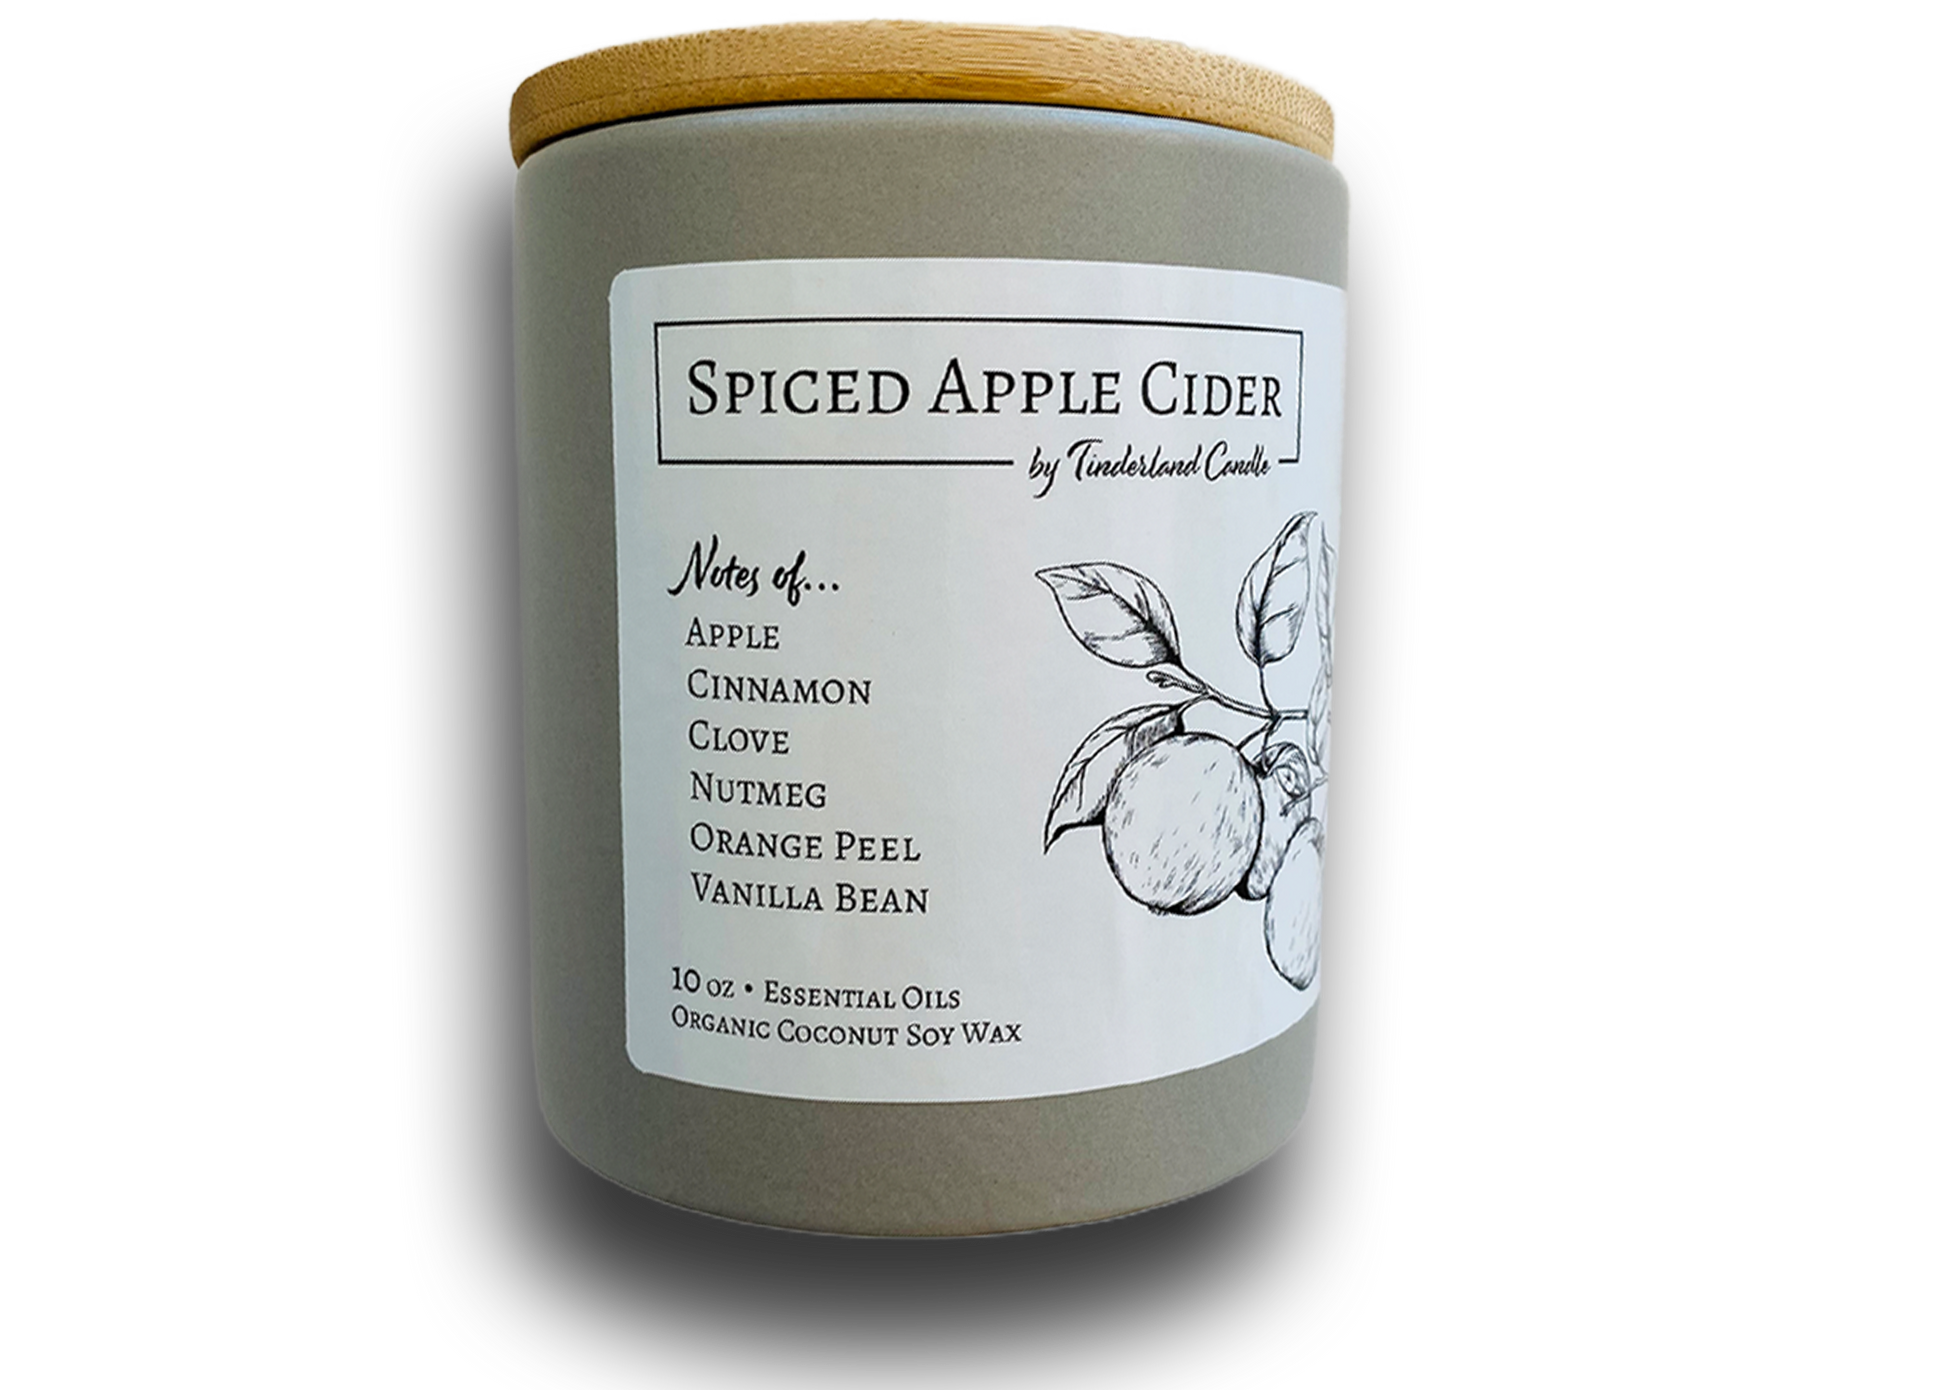 Apple Orchard Essential Oil - 100% Pure Aromatherapy Grade Essential Oil by Nature's Note Organics 1 oz.